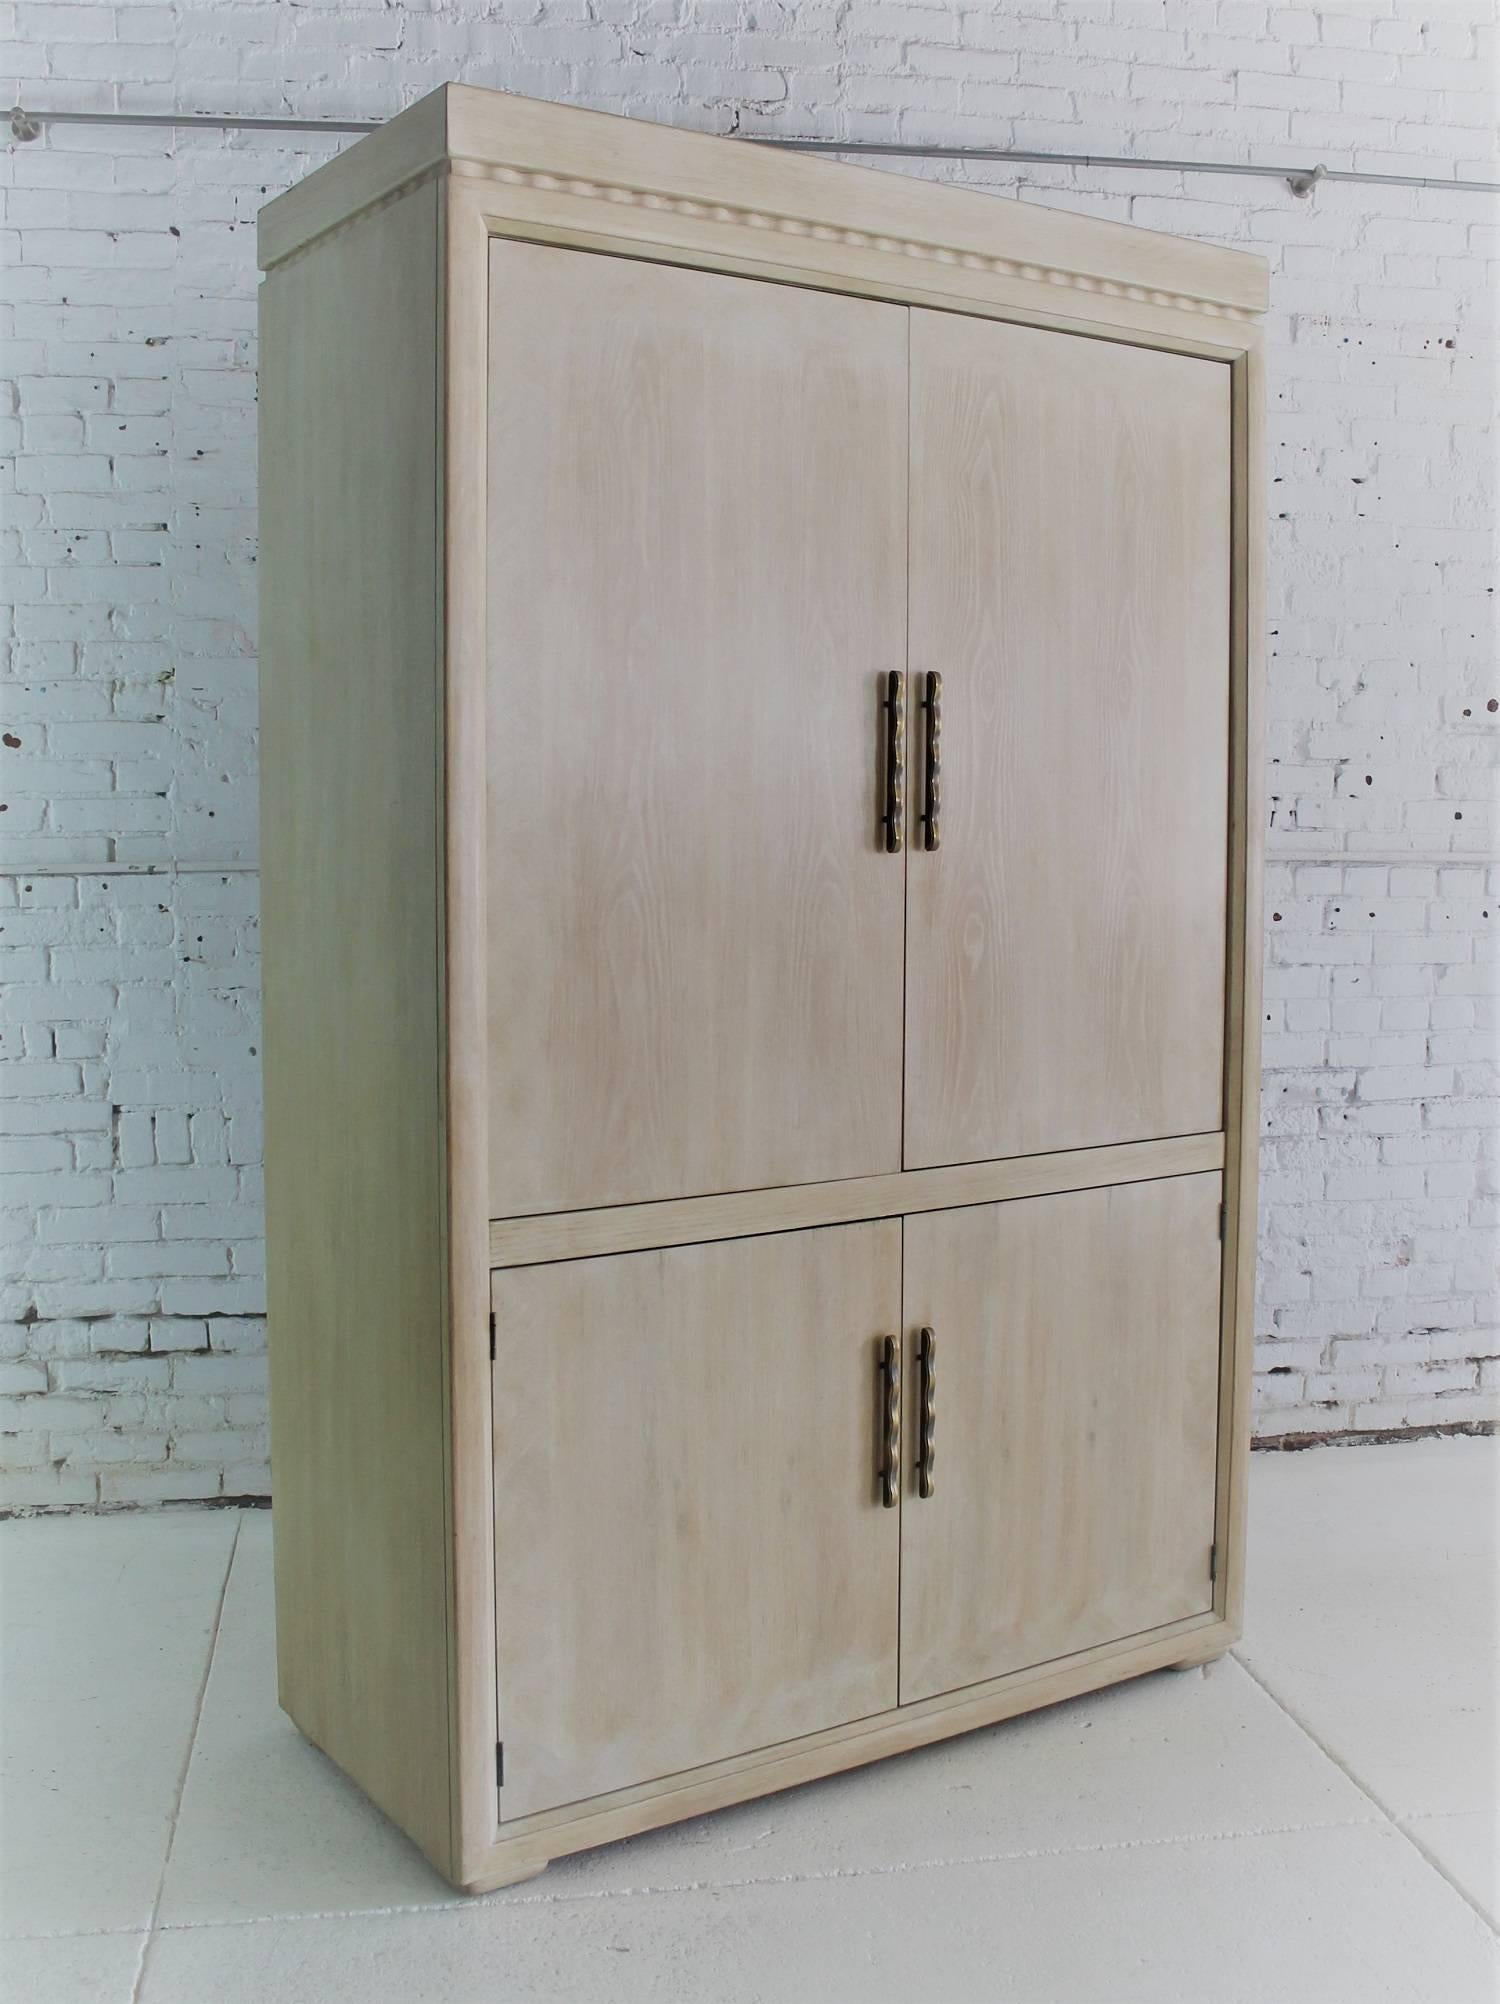 Gorgeous and monumental vintage Henredon large Brutalist-style entertainment cabinet or storage cabinet in a white-washed blonde finish. In excellent condition, circa 1993.

This handsome cabinet is a wonderful example of Henredon’s superb quality